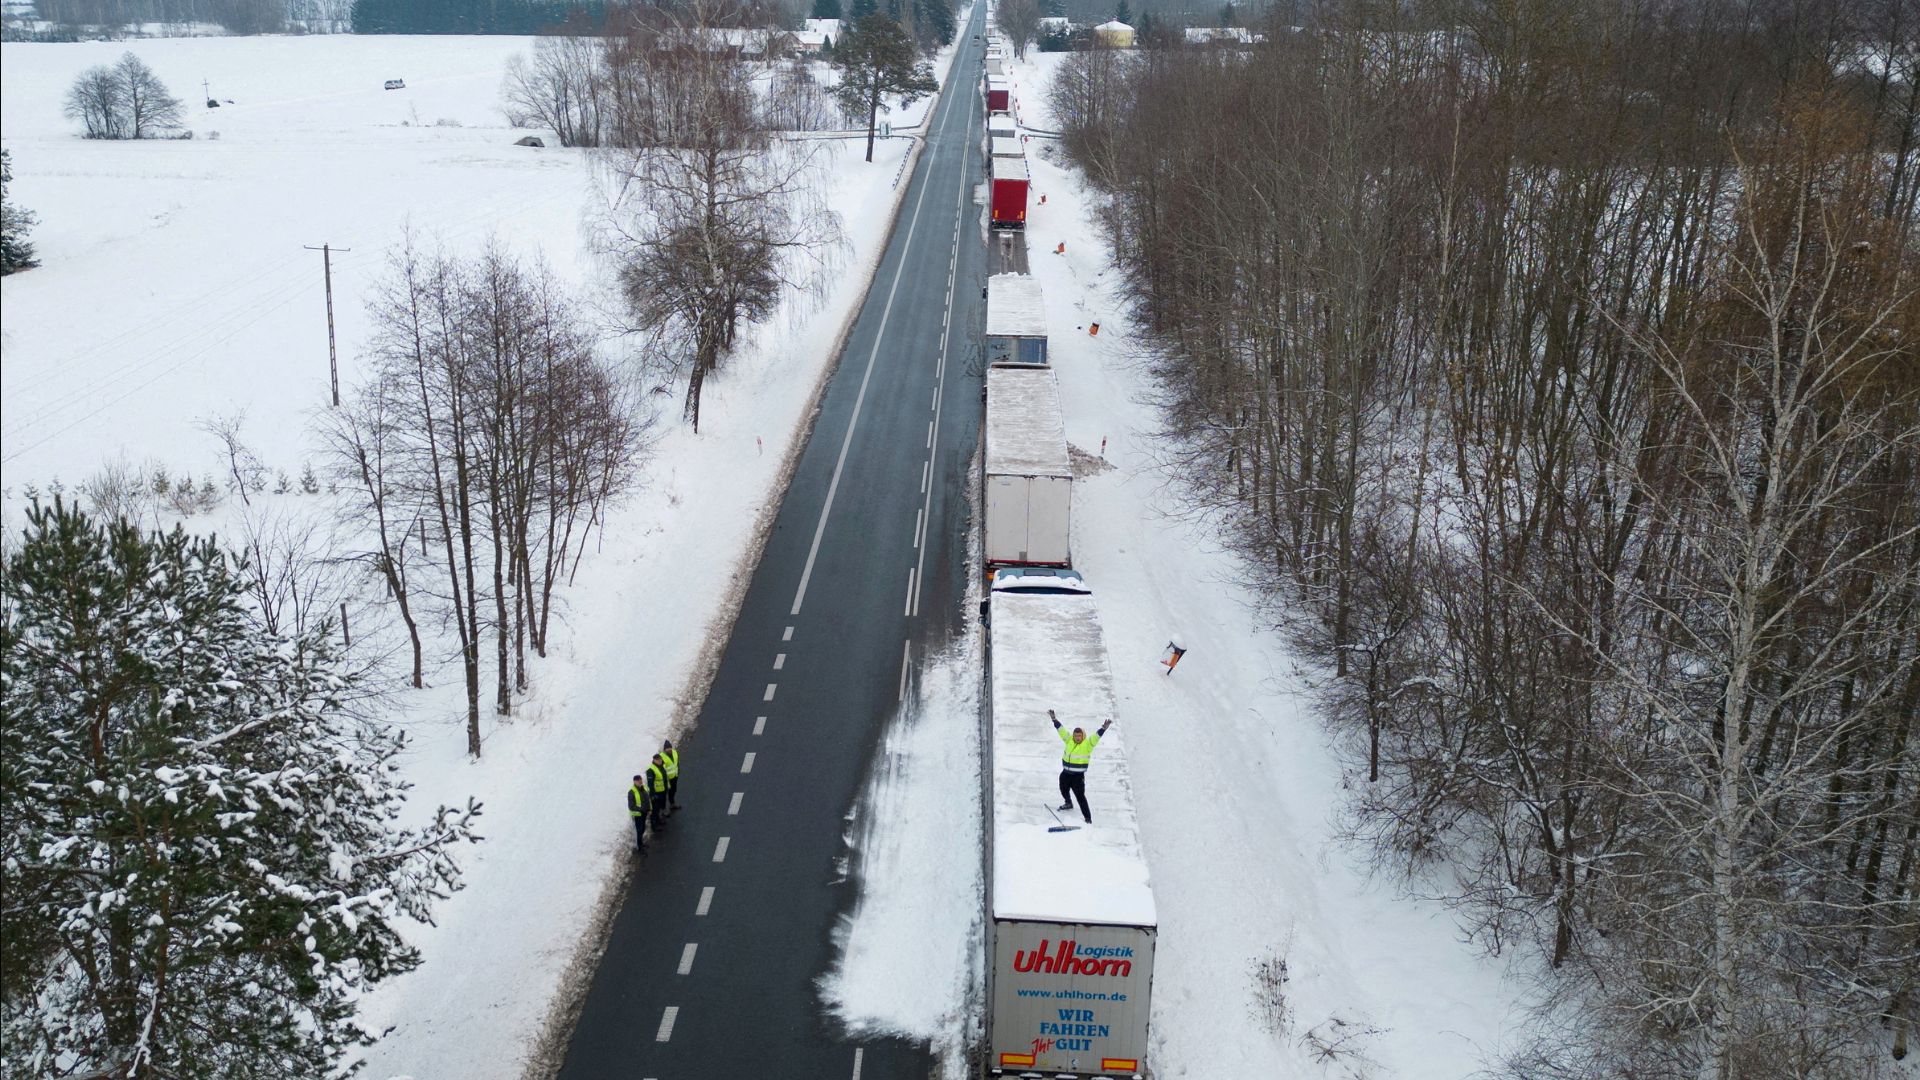  A truck driver from Ukraine waves from his truck roof while waiting in a long queue to cross the Polish-Ukrainian border at the Dorohusk-Jagodzin crossing, in Okopy, Poland on December 4. /Kuba Stezycki/File Photo/Reuters